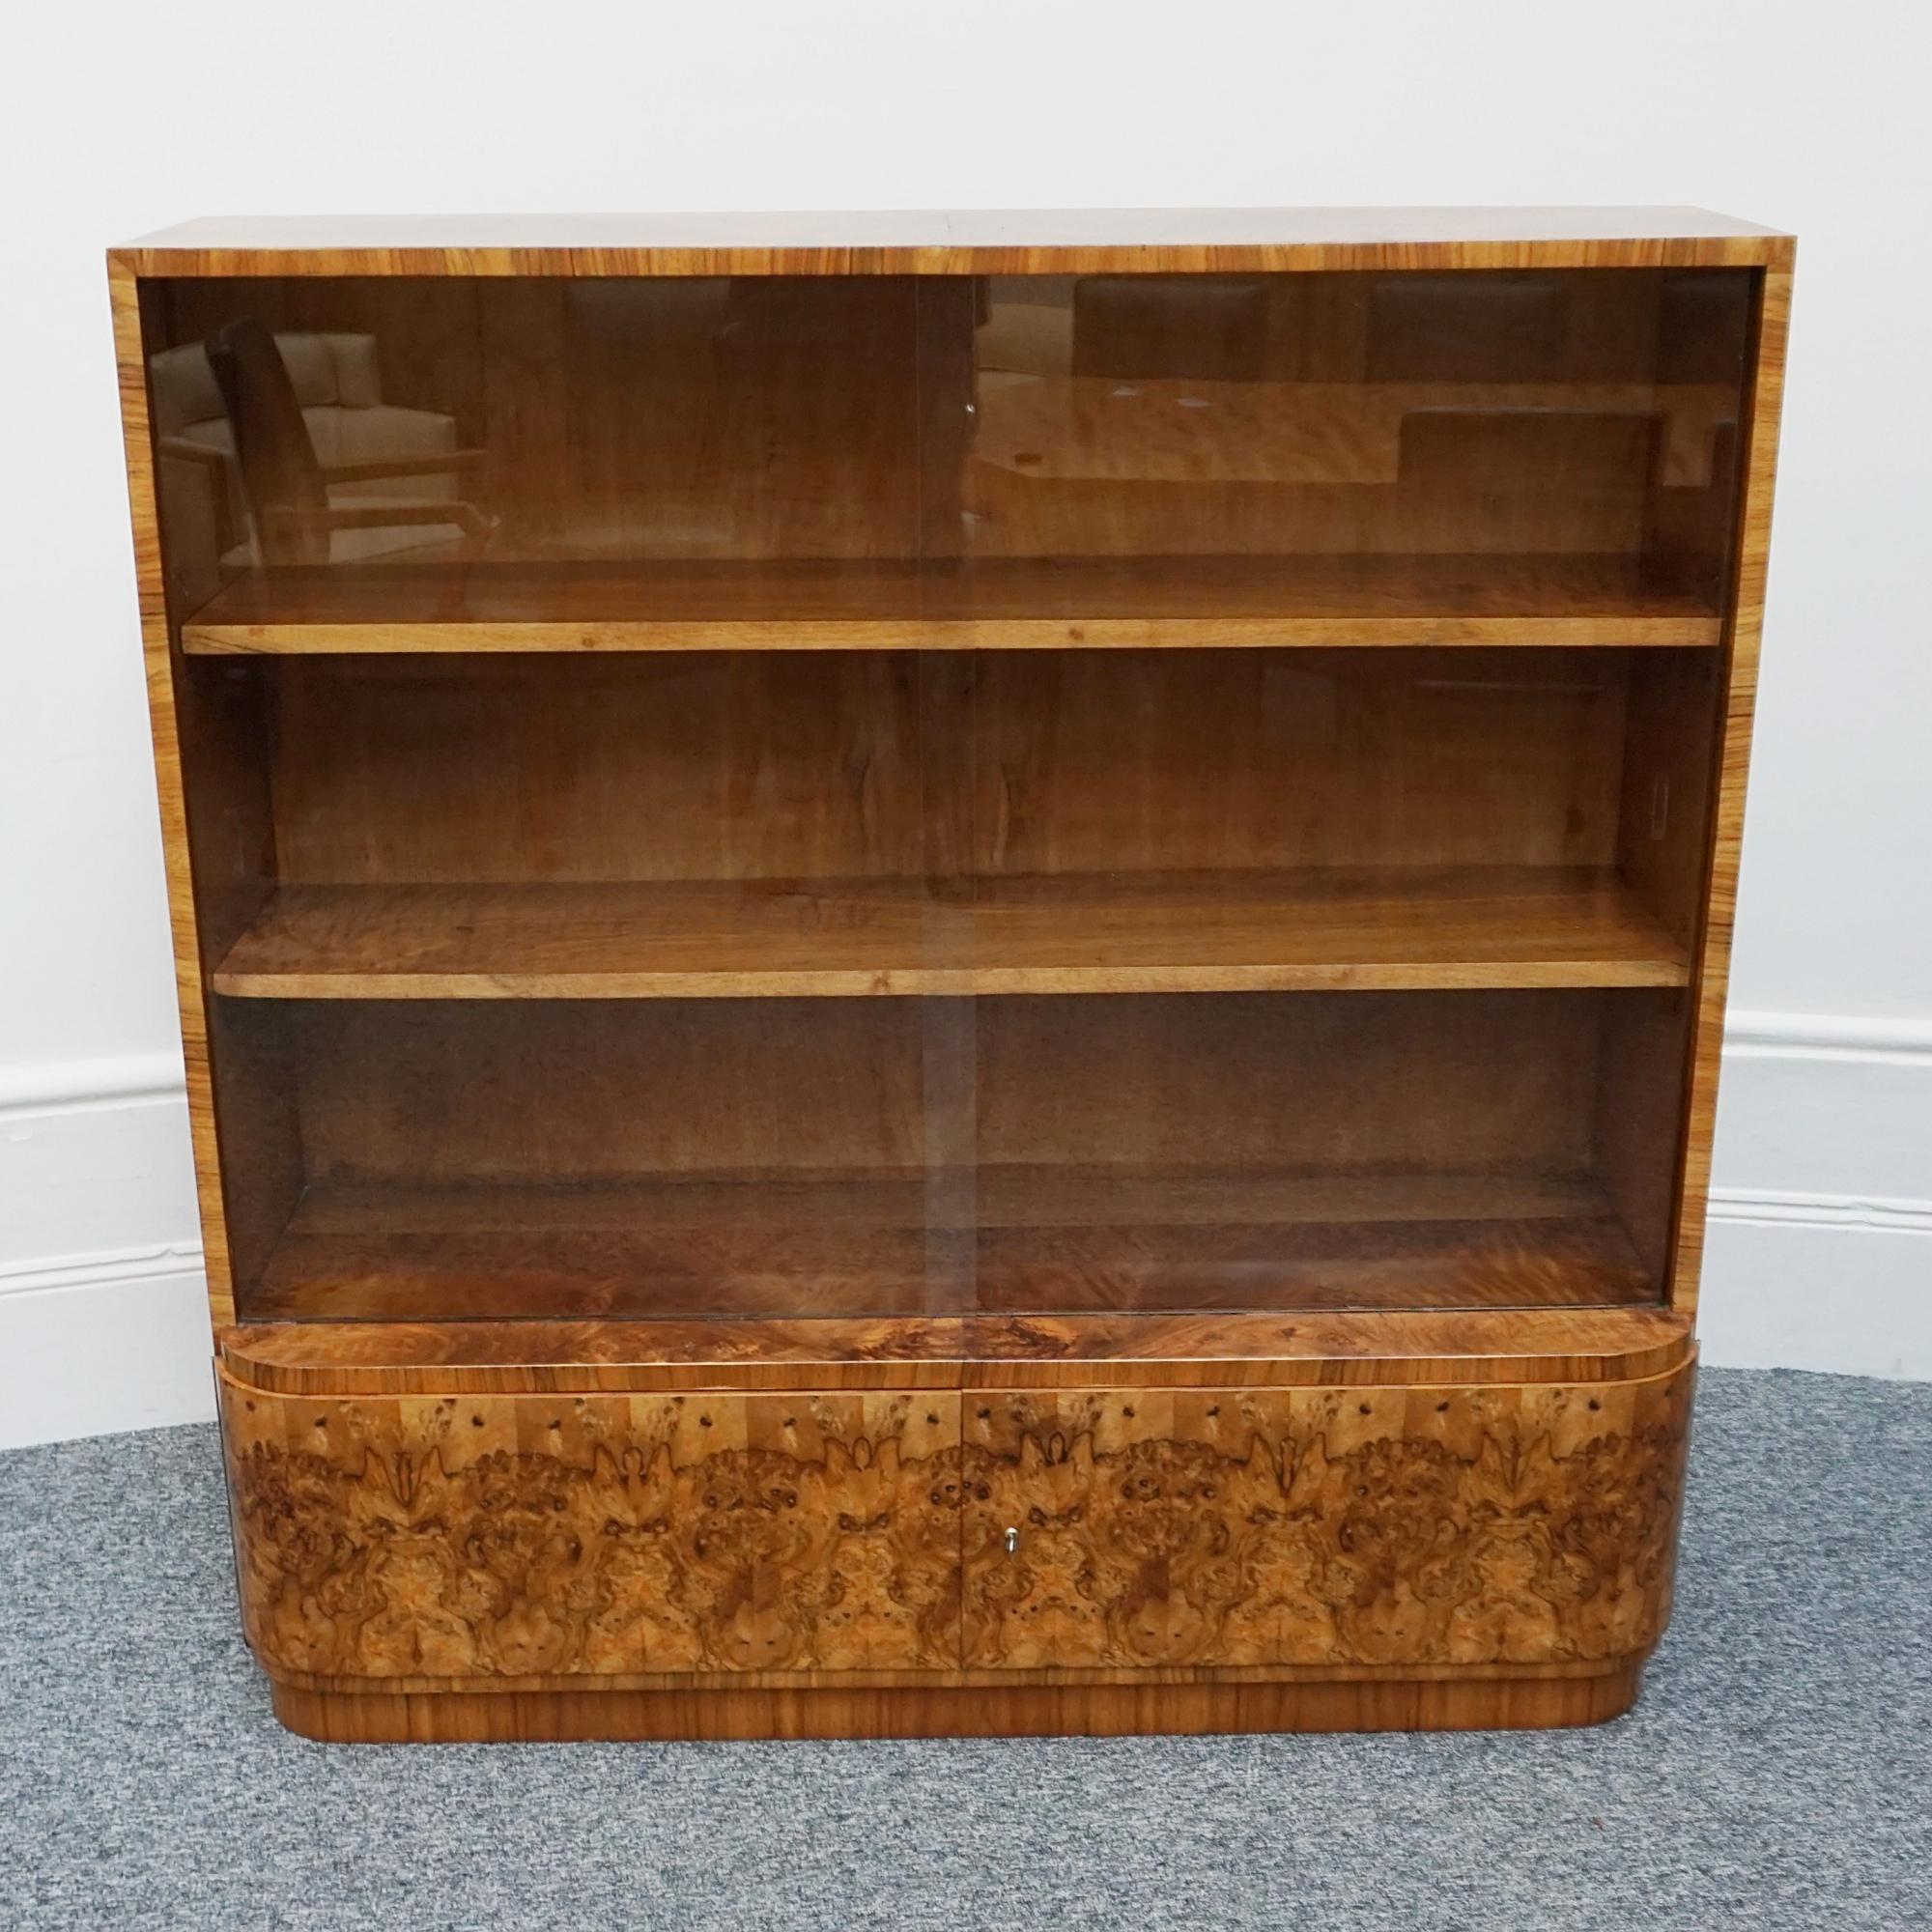 An Art Deco bookcase. Sliding glass doors with three interior adjustable solid walnut shelves and deep storage to lower section. Burr walnut veneered with figured walnut banding. 

Dimensions: H 78cm W 134cm D 63cm 

Origin: English

Date: Circa